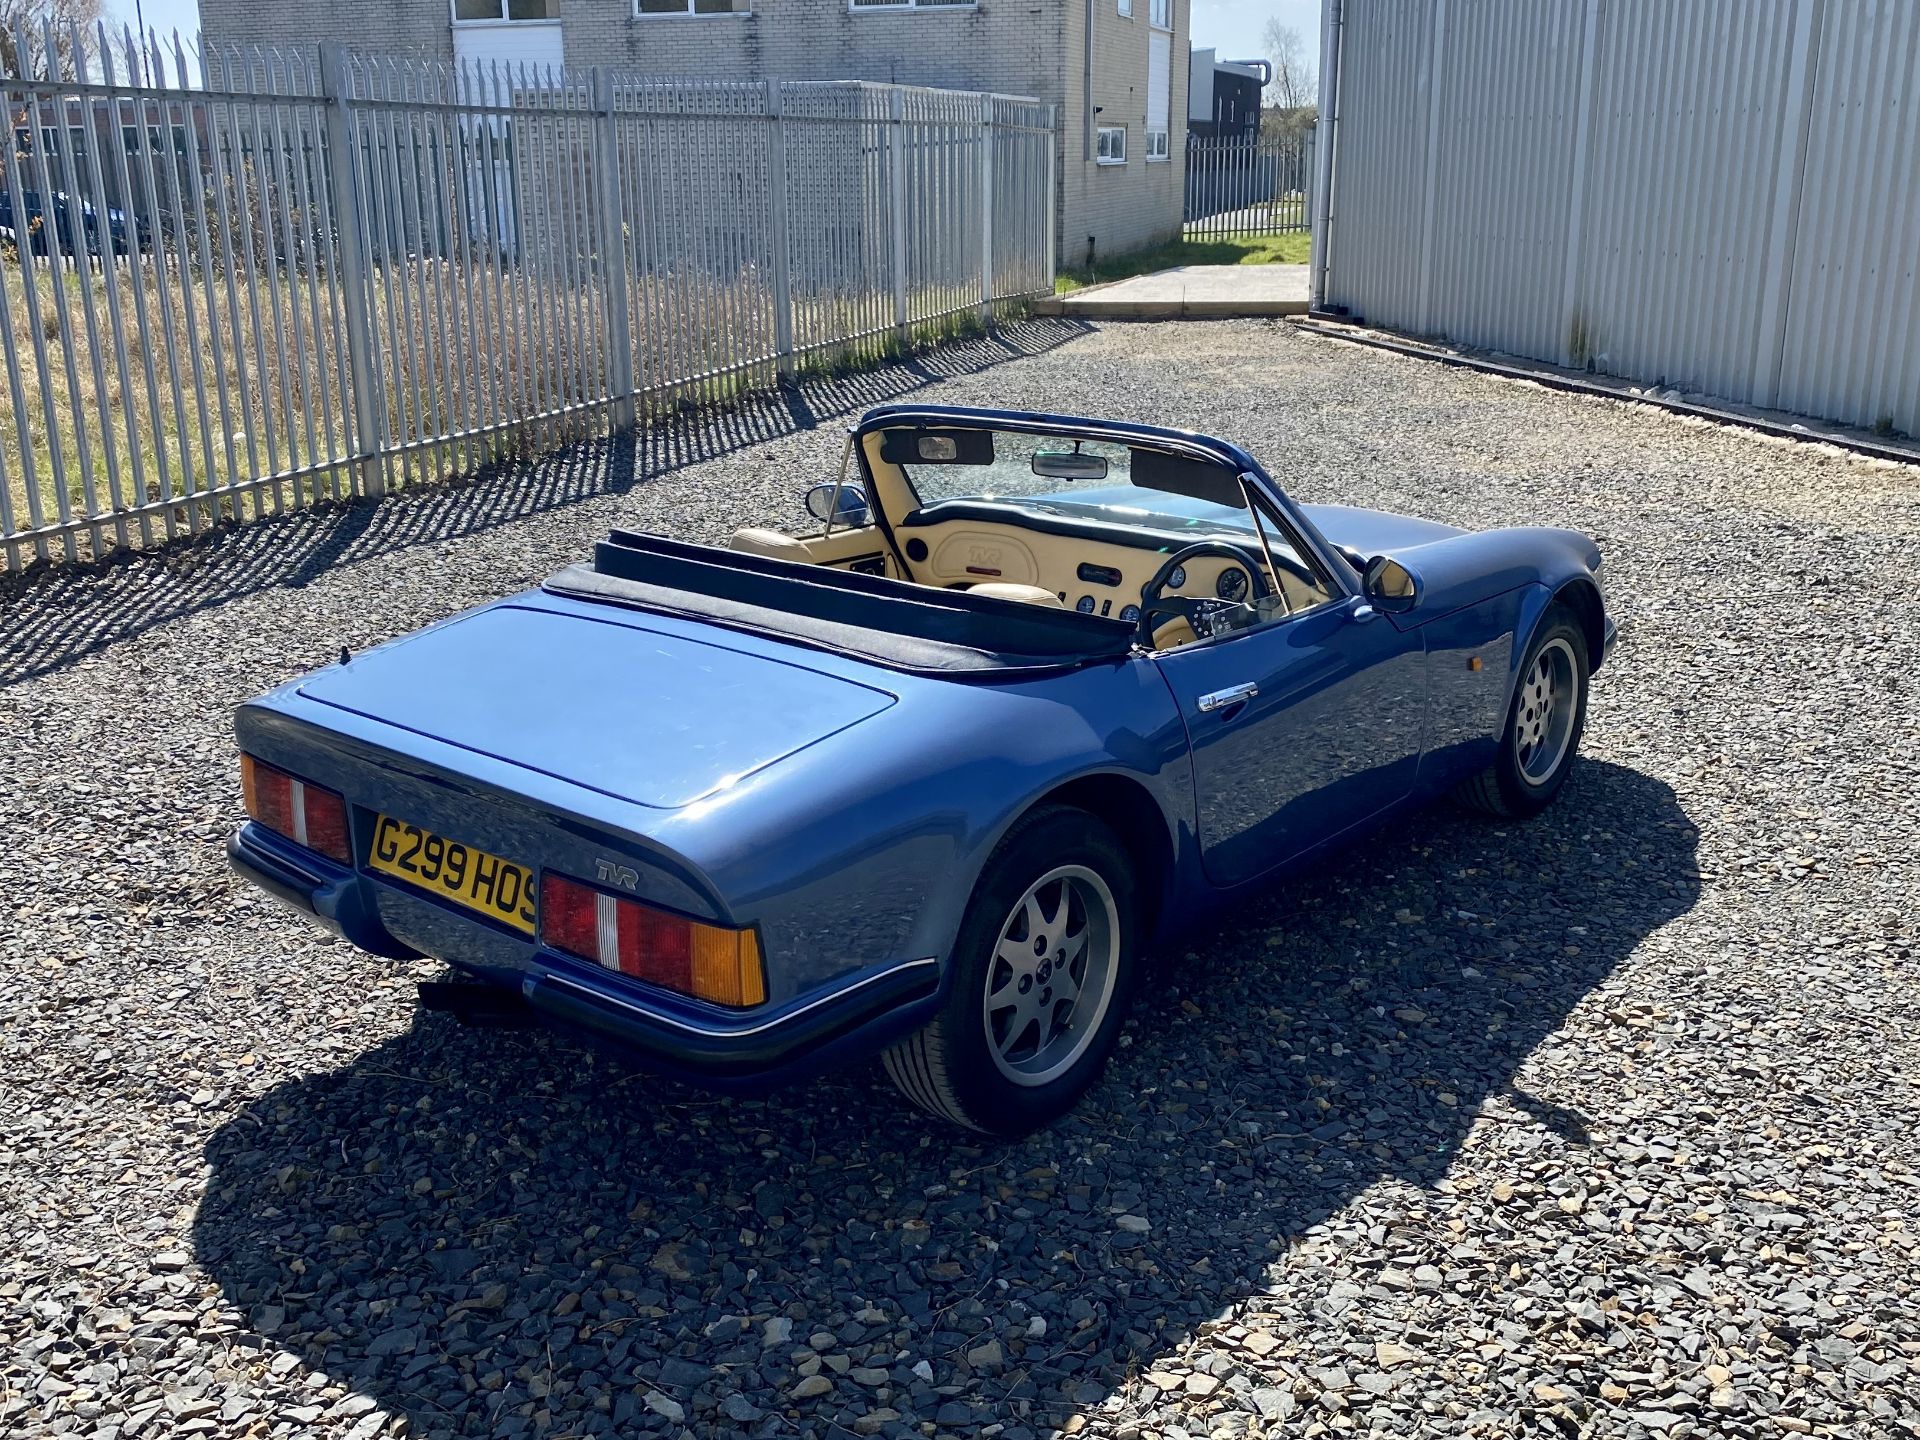 TVR S2 - Image 6 of 60